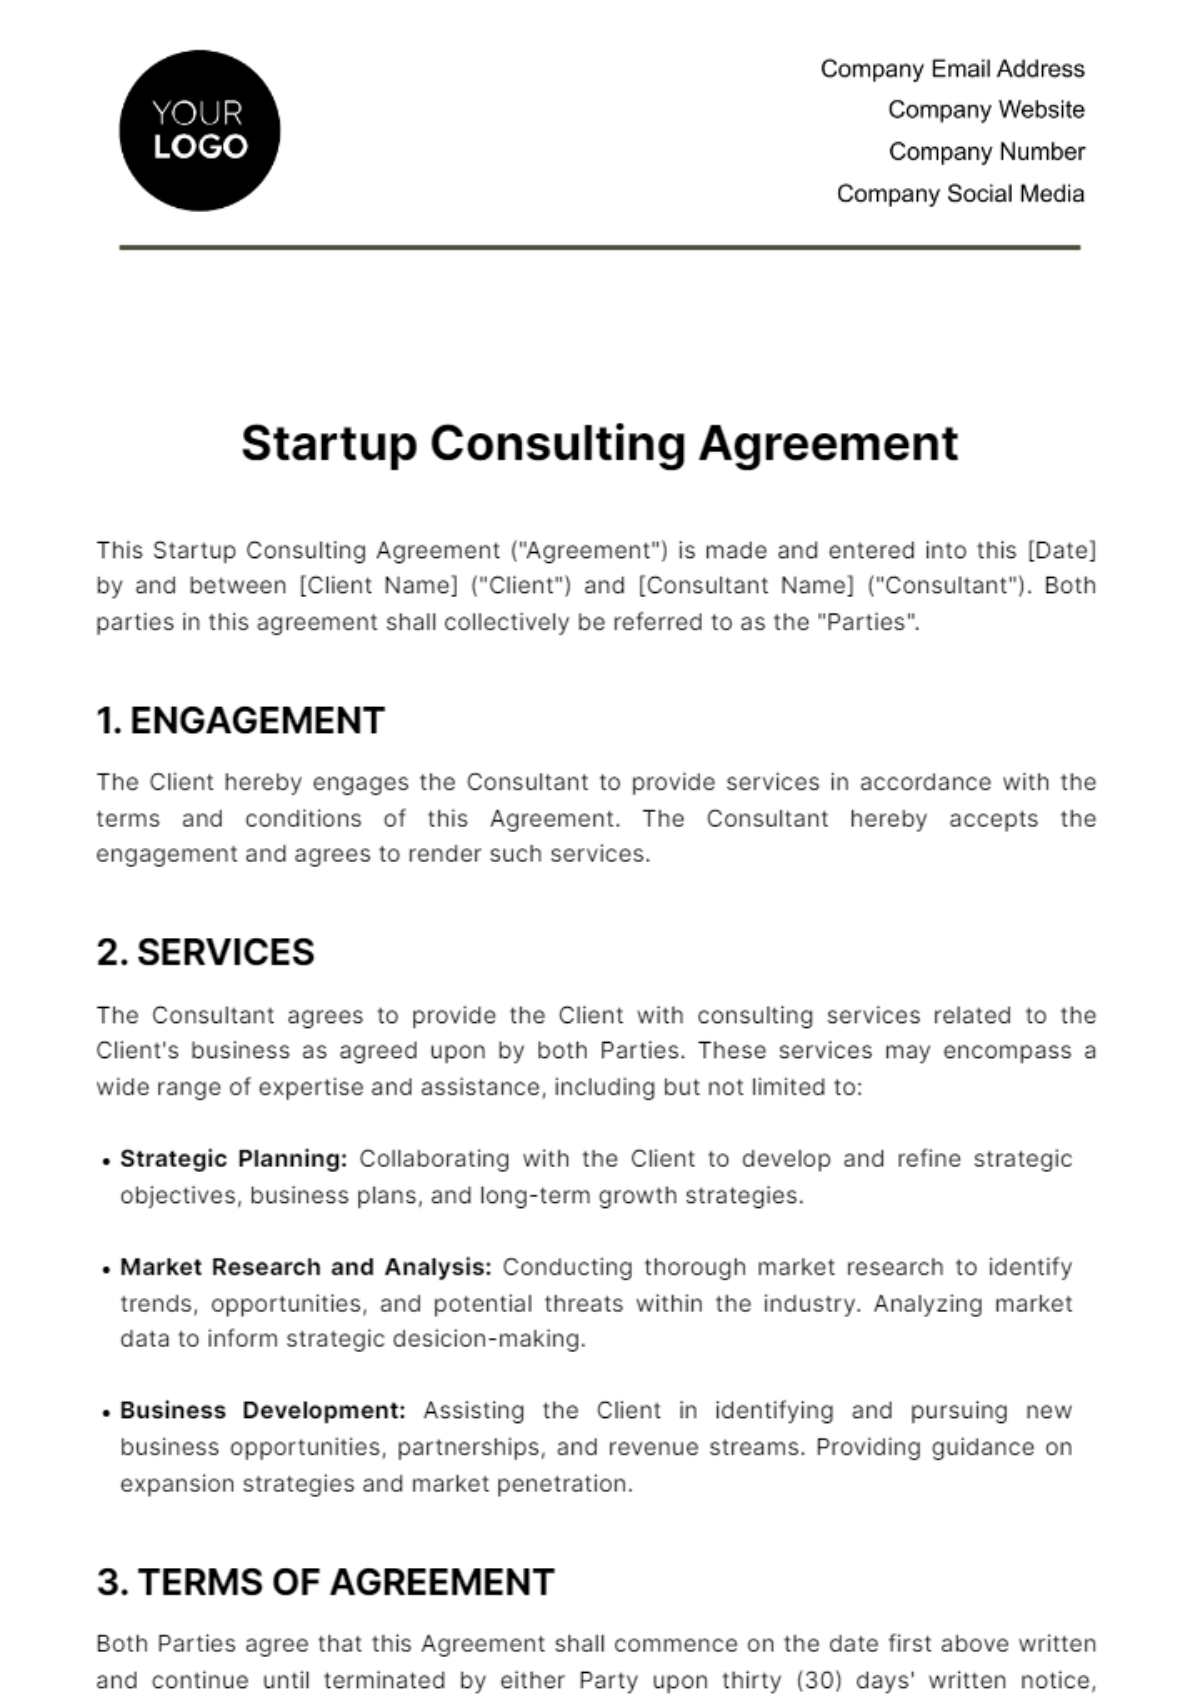 Free Startup Consulting Agreement Template